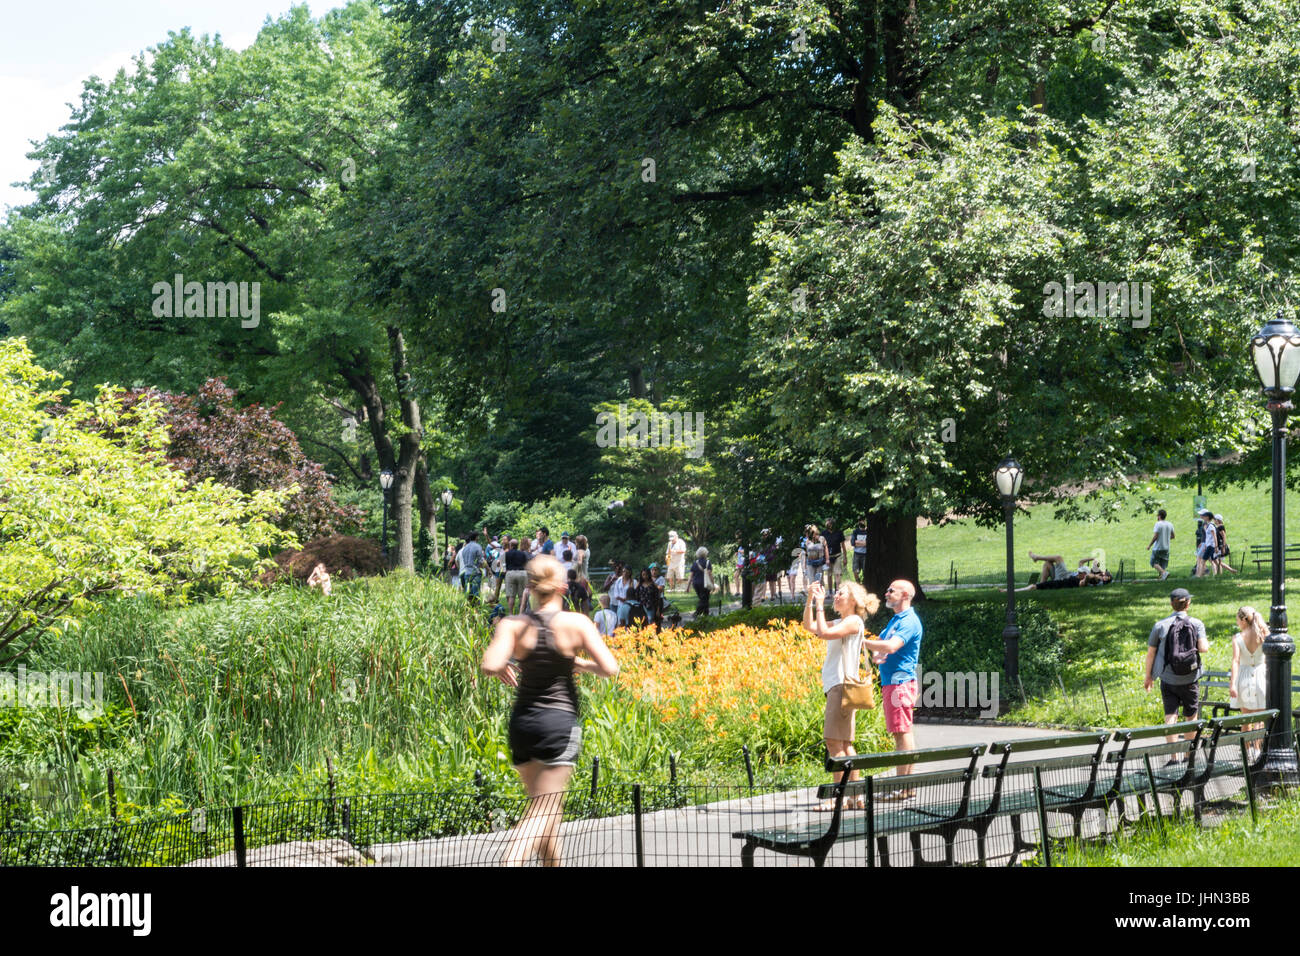 People Enjoying Central Park in Summertime, NYC, USA Stock Photo - Alamy